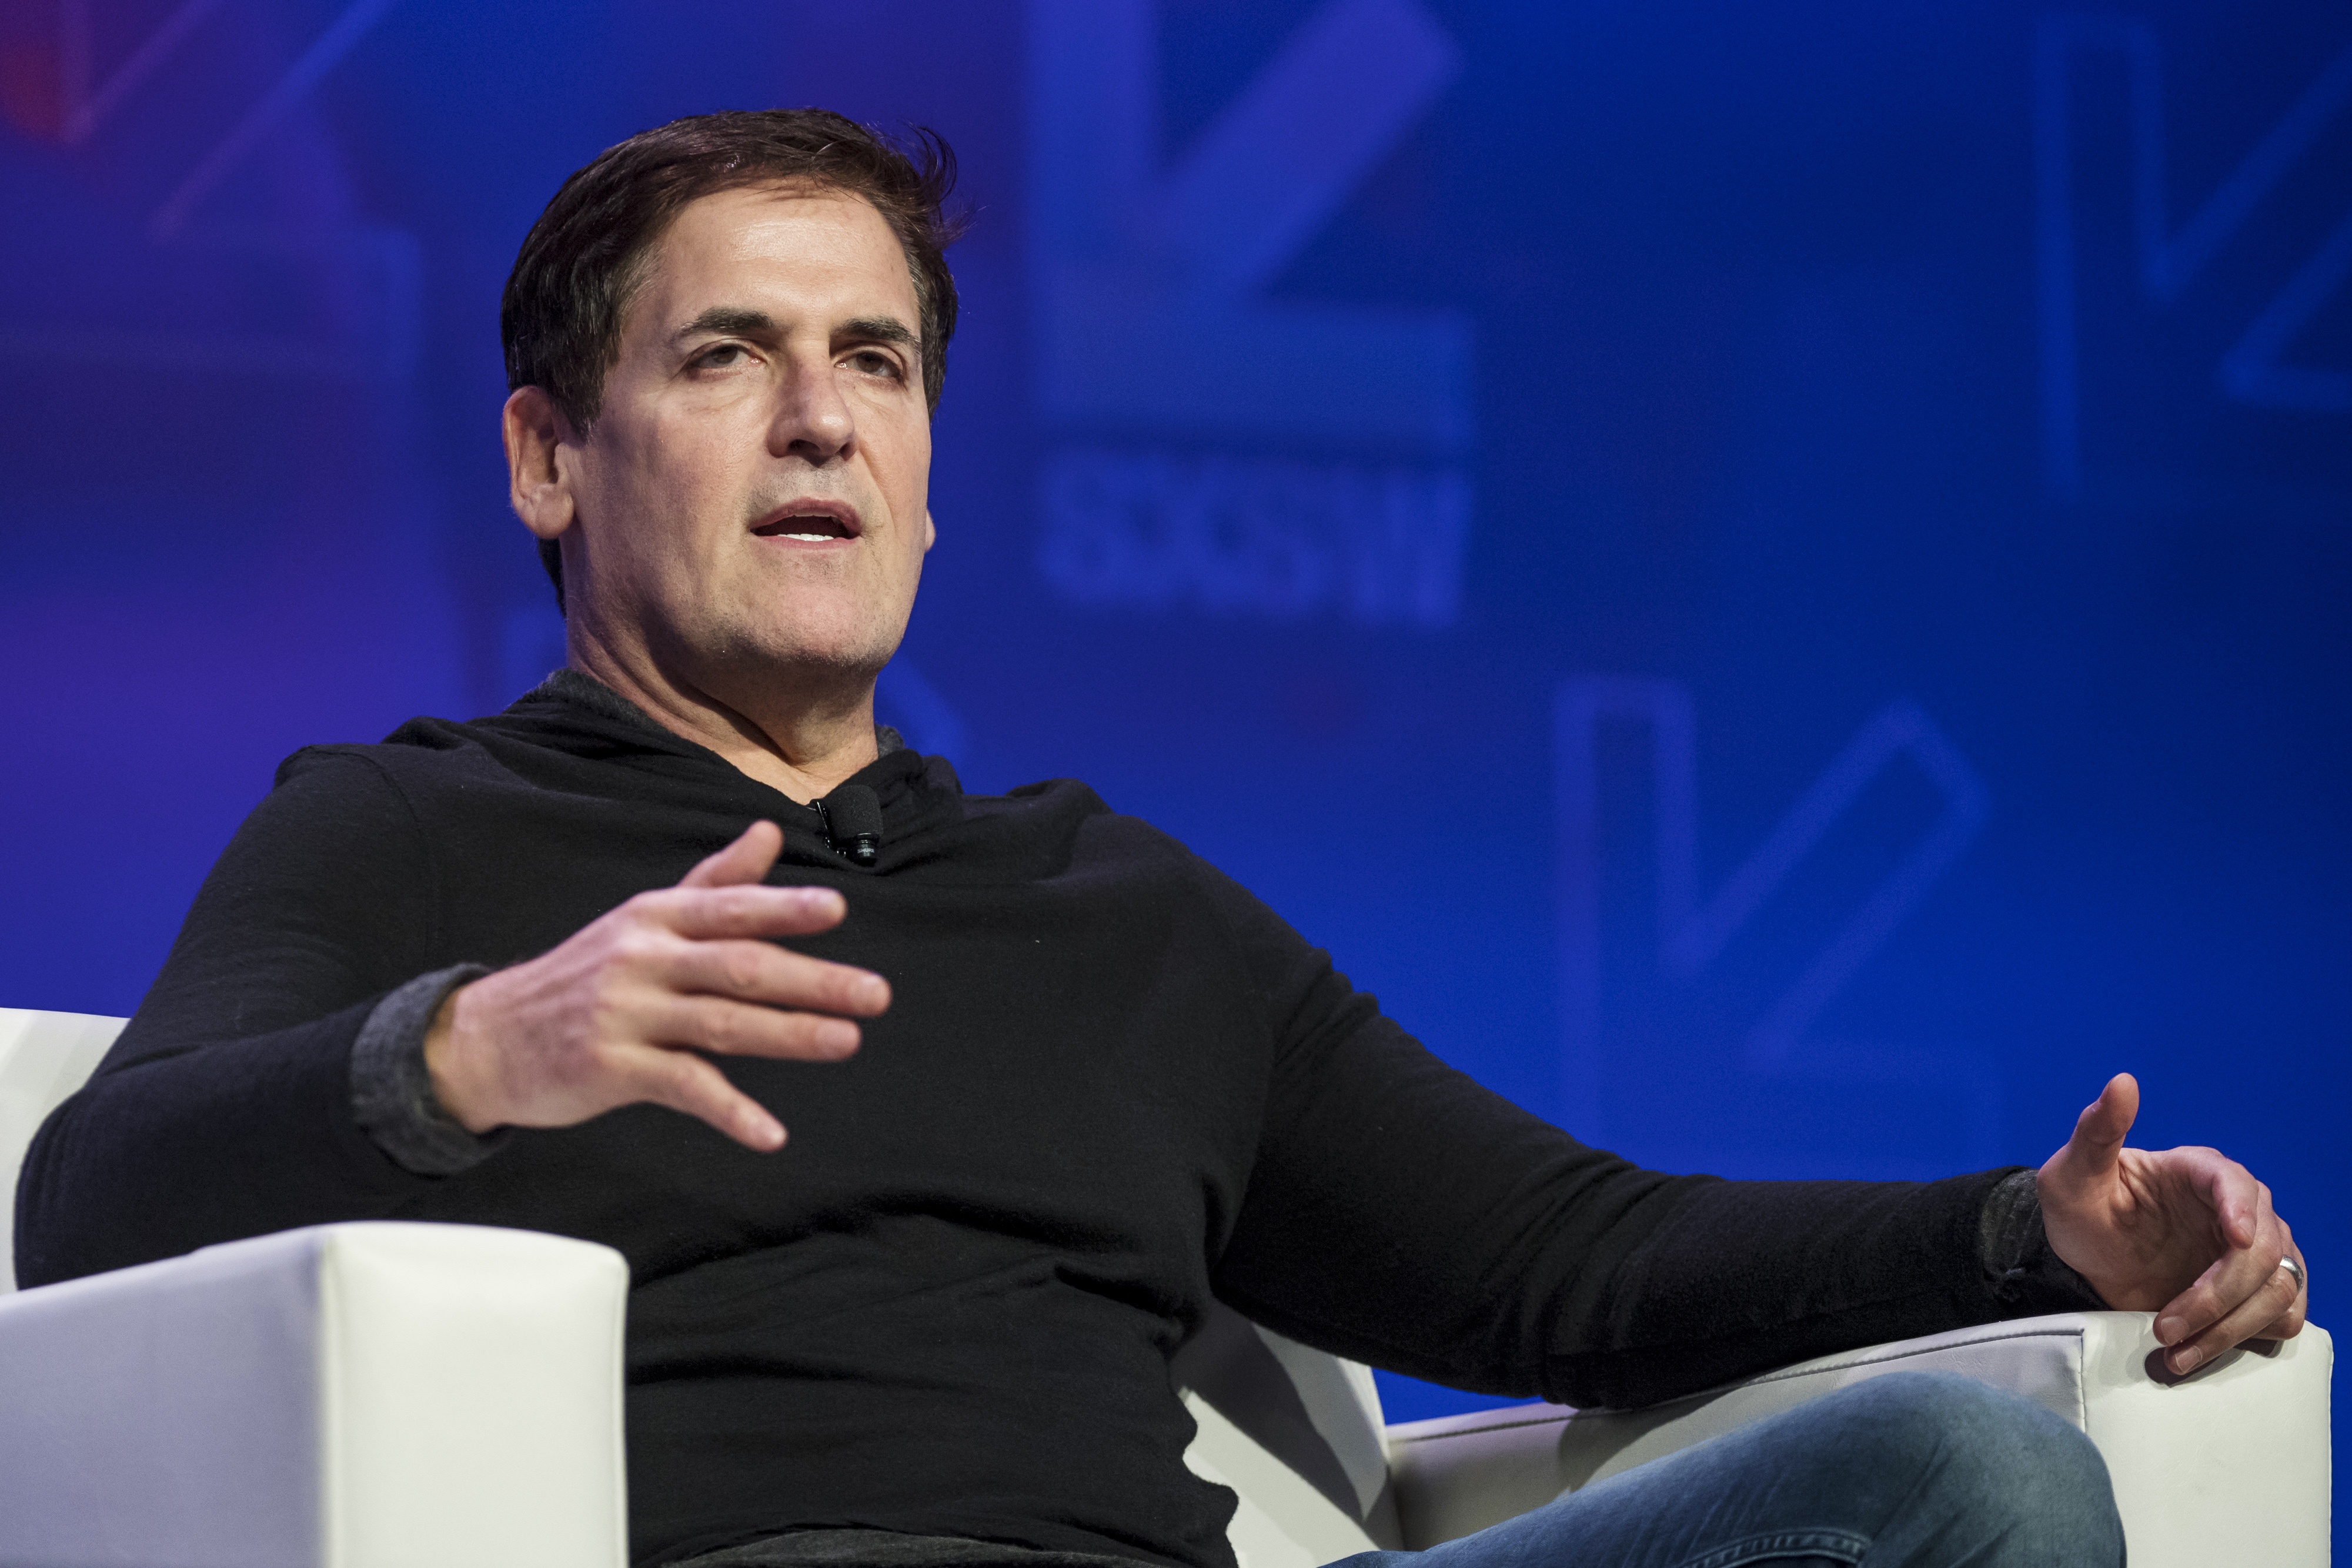 Mark Cuban on the No. 1 Skill He Values in His Employees